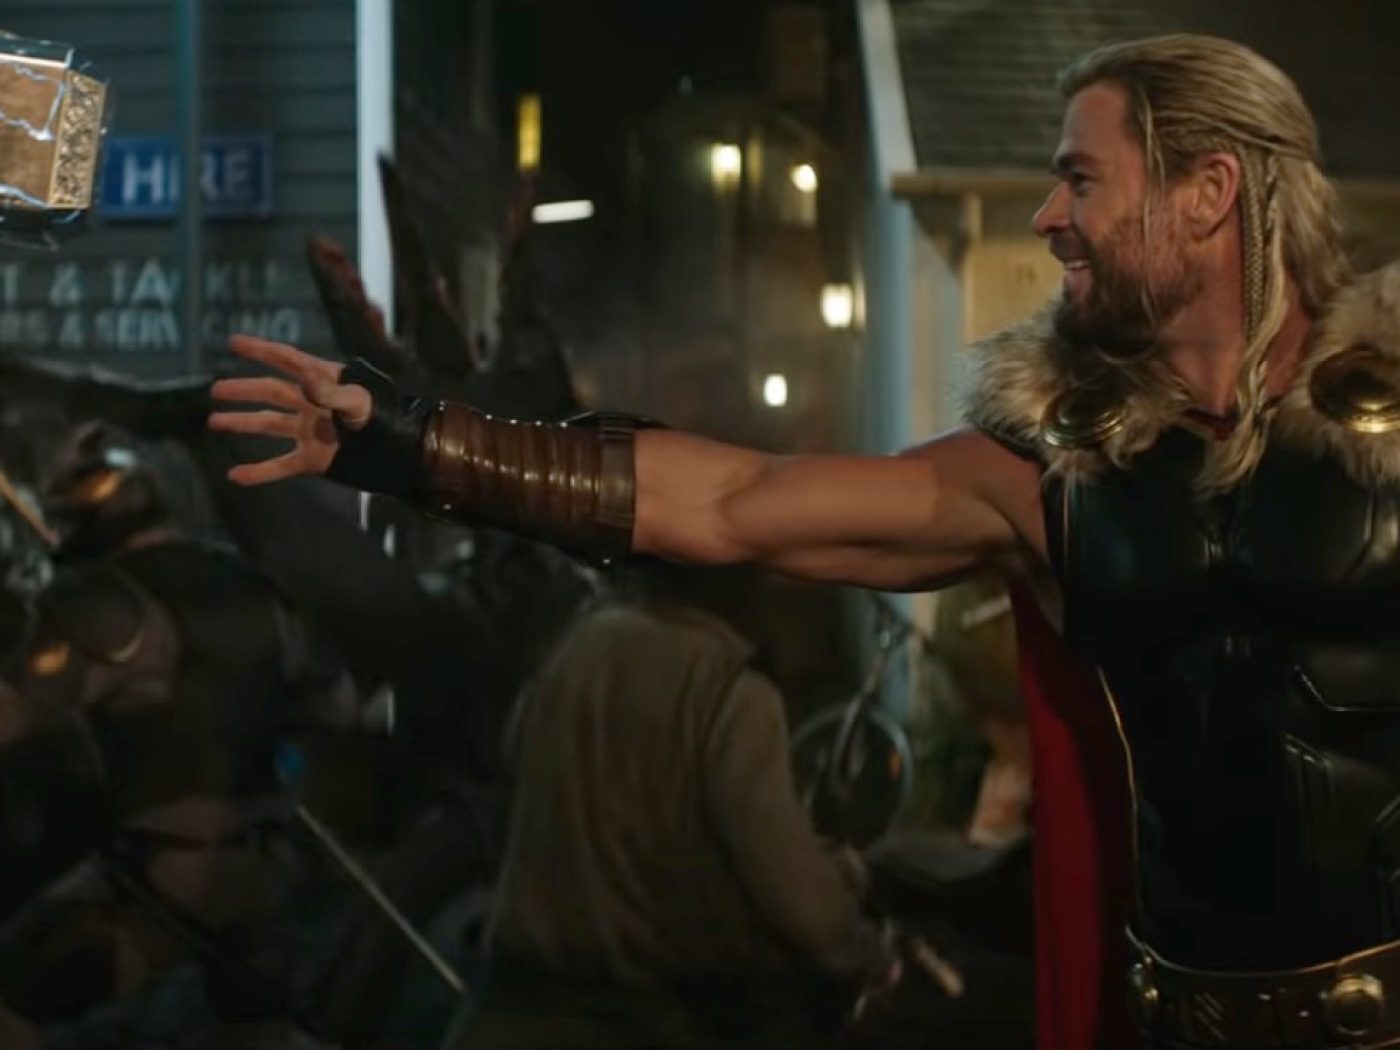 Thor: Love and Thunder now ties Eternals for the lowest verified